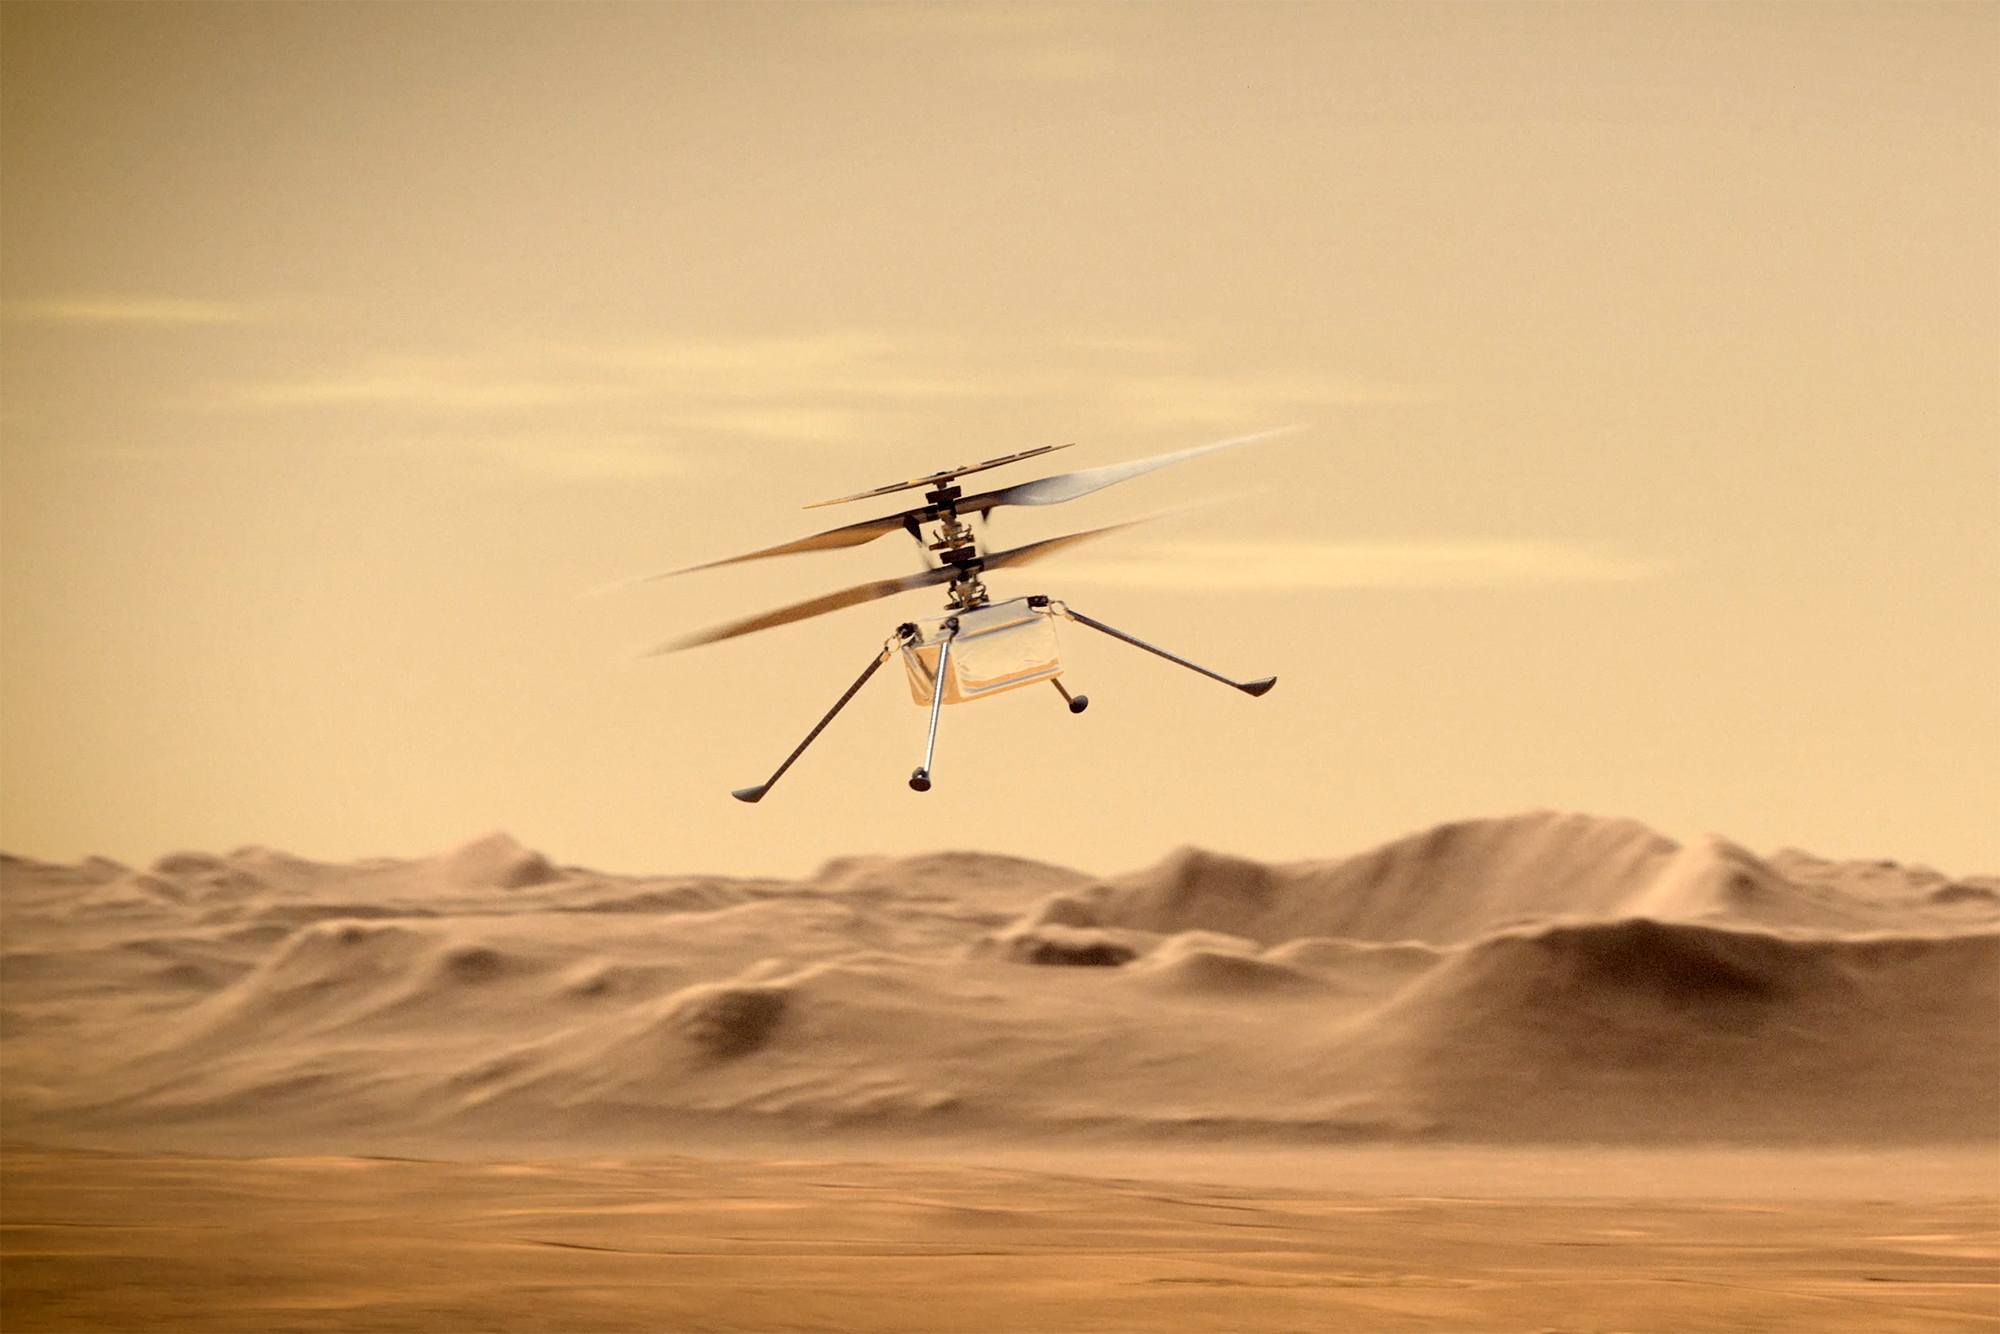 NASA’s Mars helicopter flies again after a two-month break